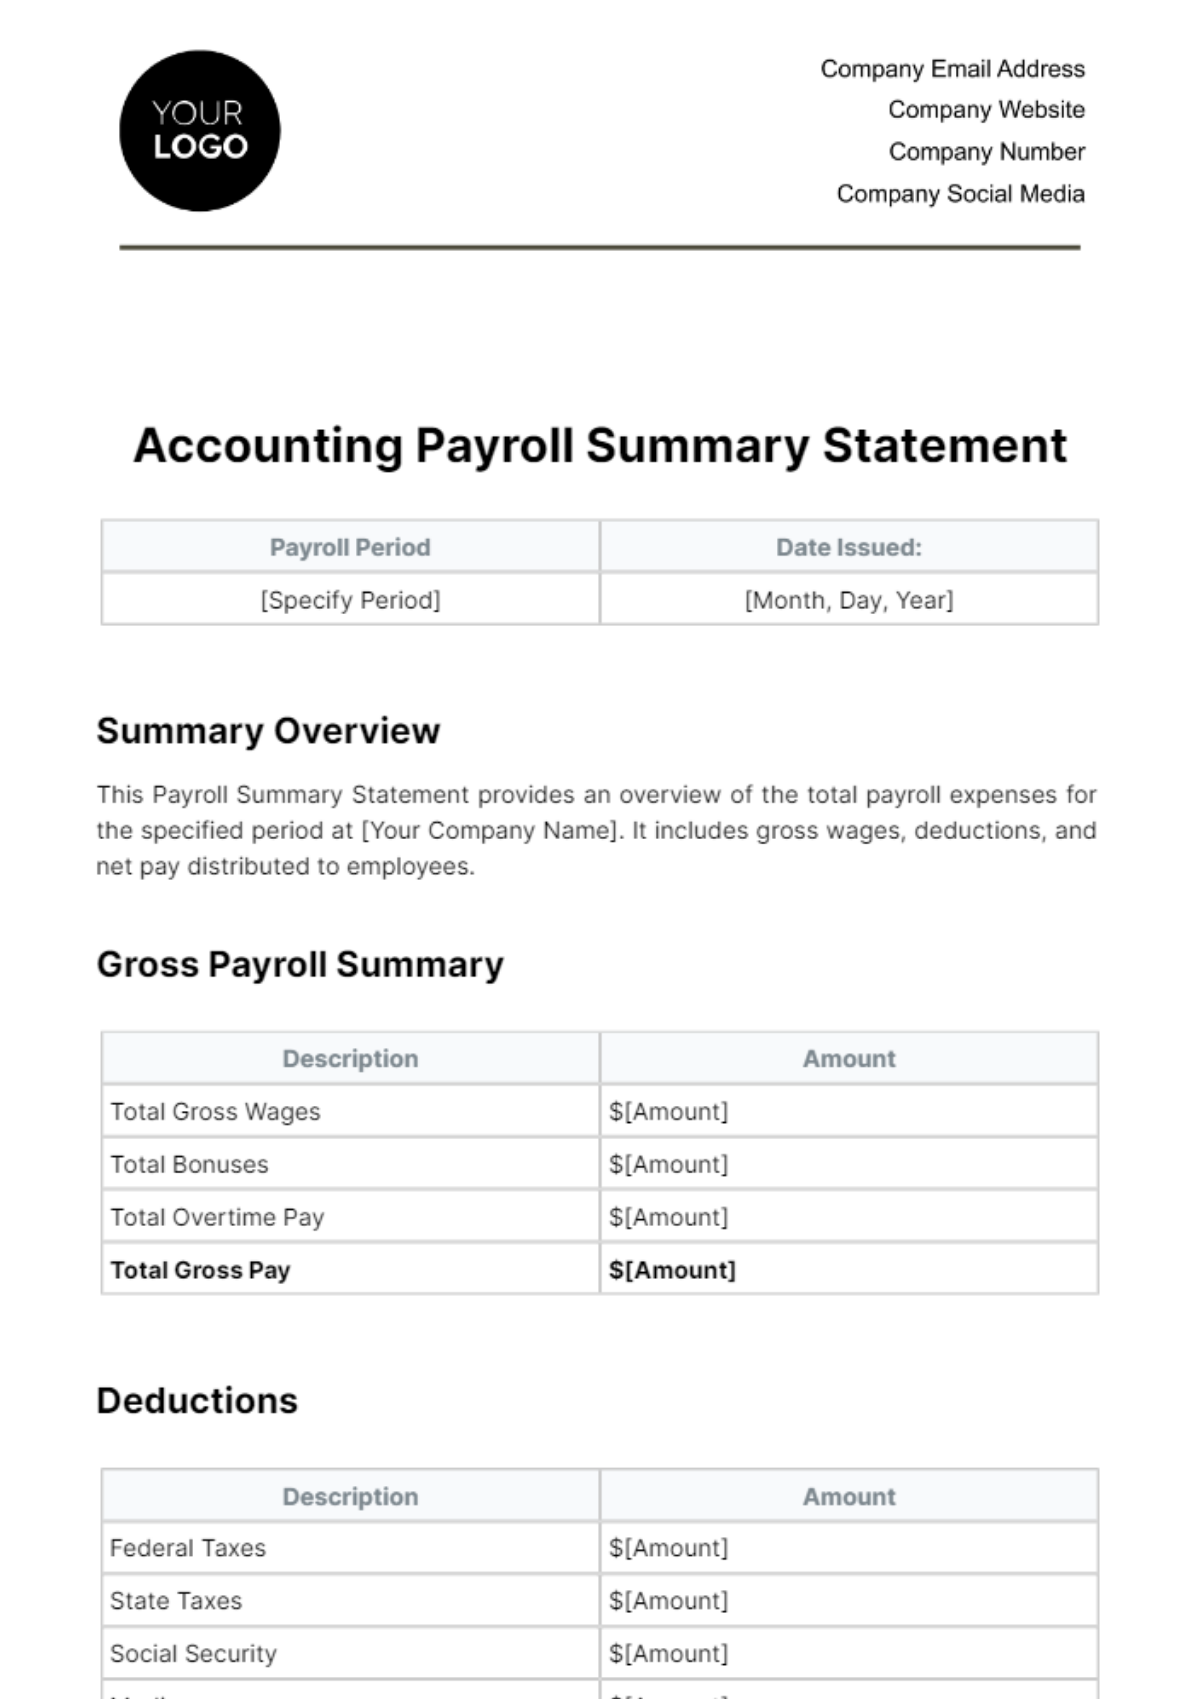 Accounting Payroll Summary Statement Template